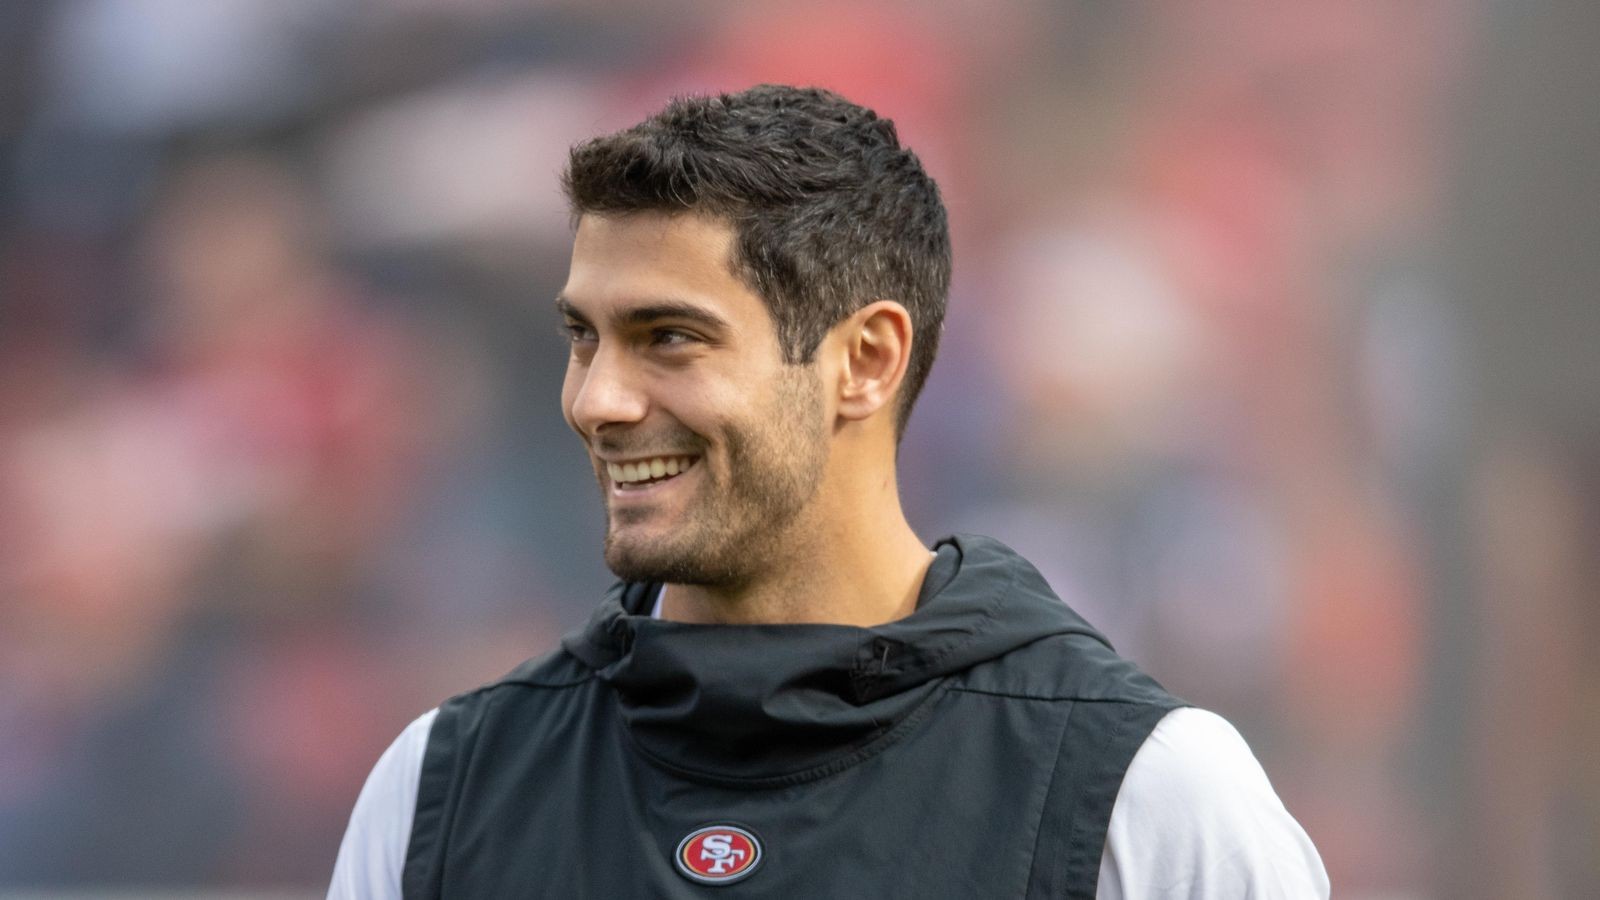 Kyle Shanahan discussed the 49ers QB scenarios after Jimmy Garoppolo trade